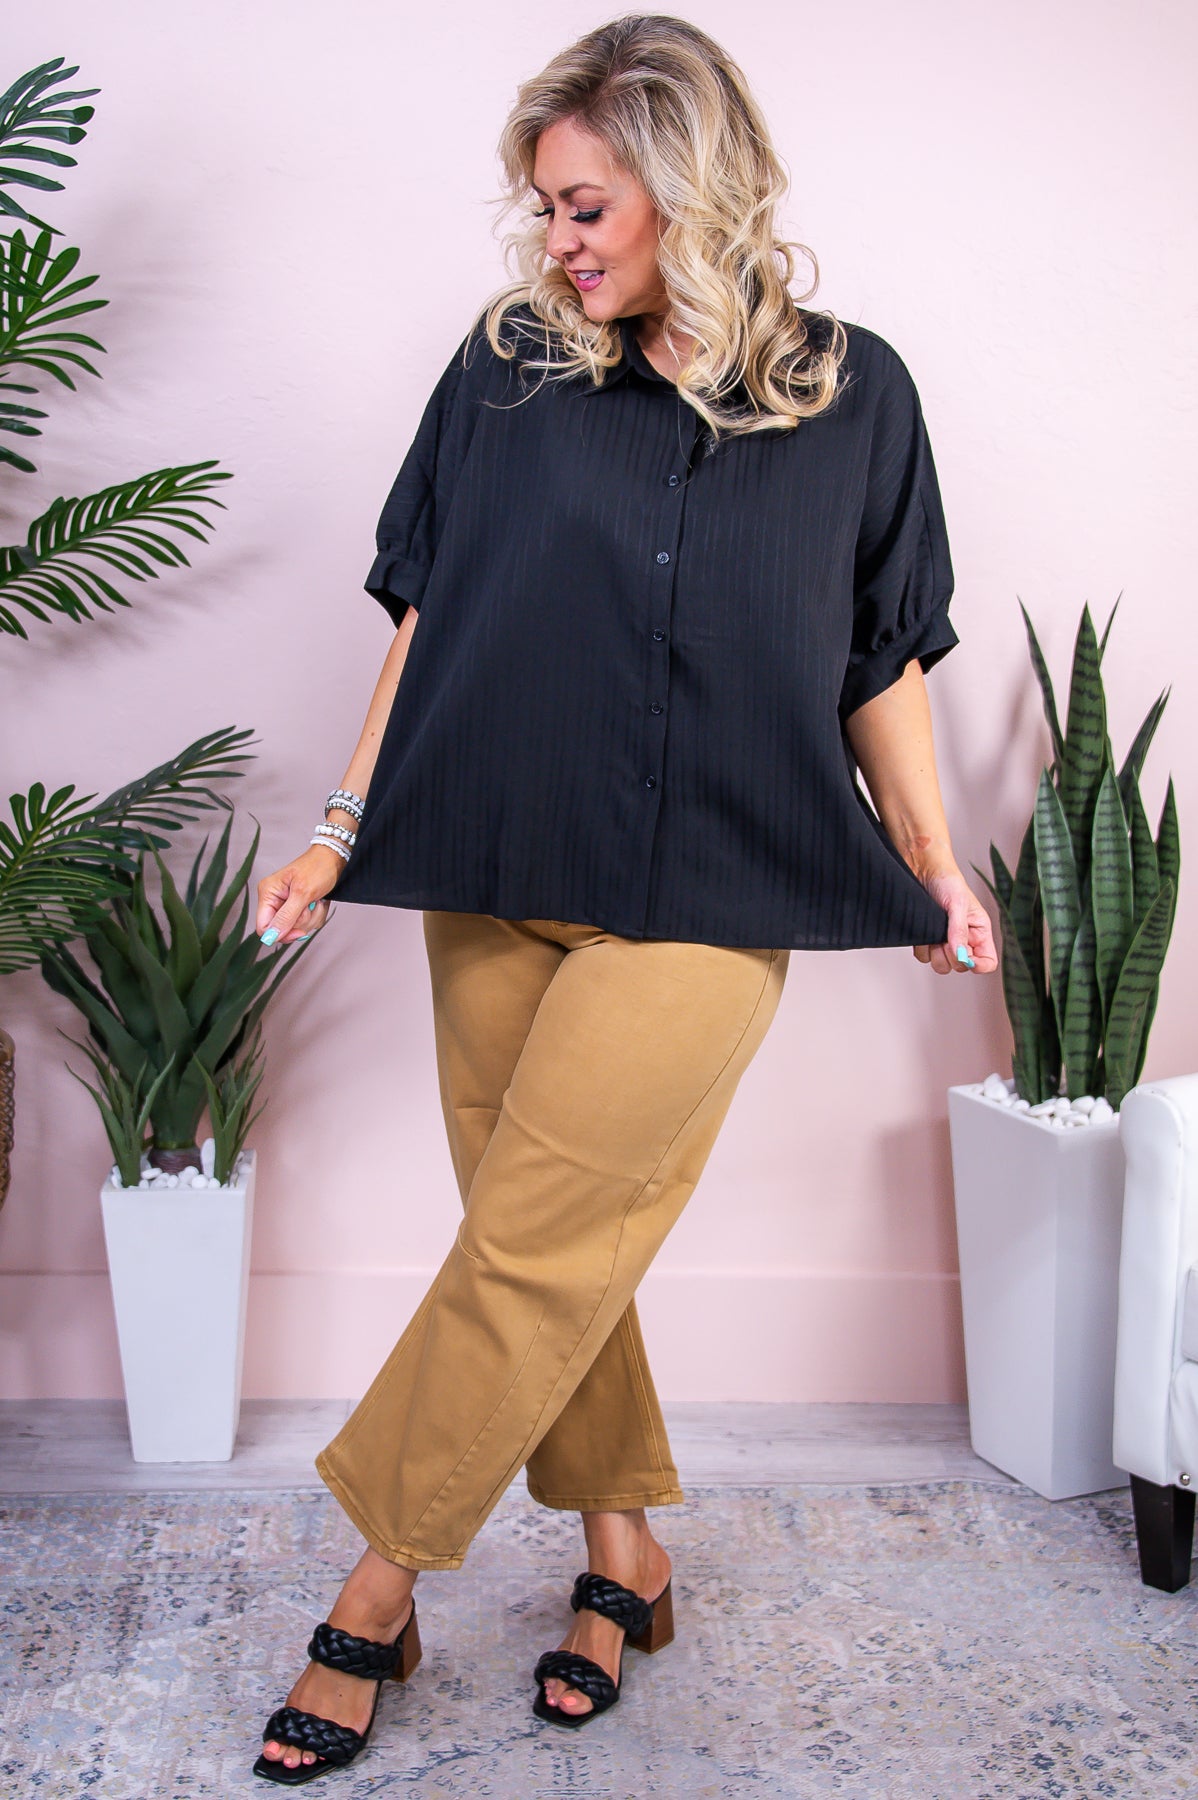 Well Aren't You Cute Black Solid Striped Top - T9591BK